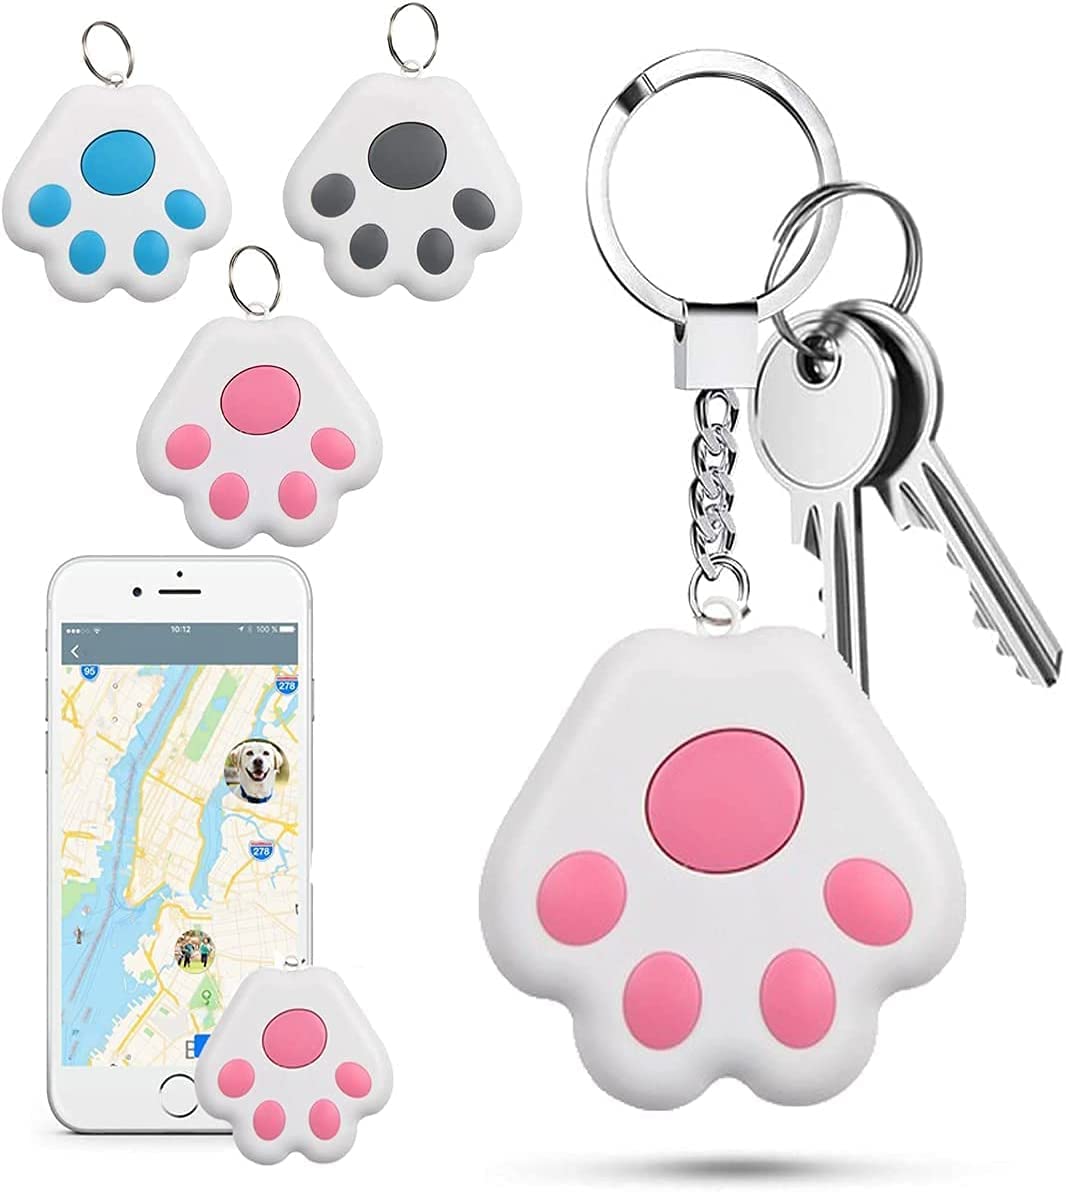 Mini Dog Paw GPS Cute Pet Finders Locator Portable Portable Bluetooth Intelligent Anti-Lost Device for Luggages/Kid/Pet/Cat/Dog, No Monthly Fee App Locator(Red)